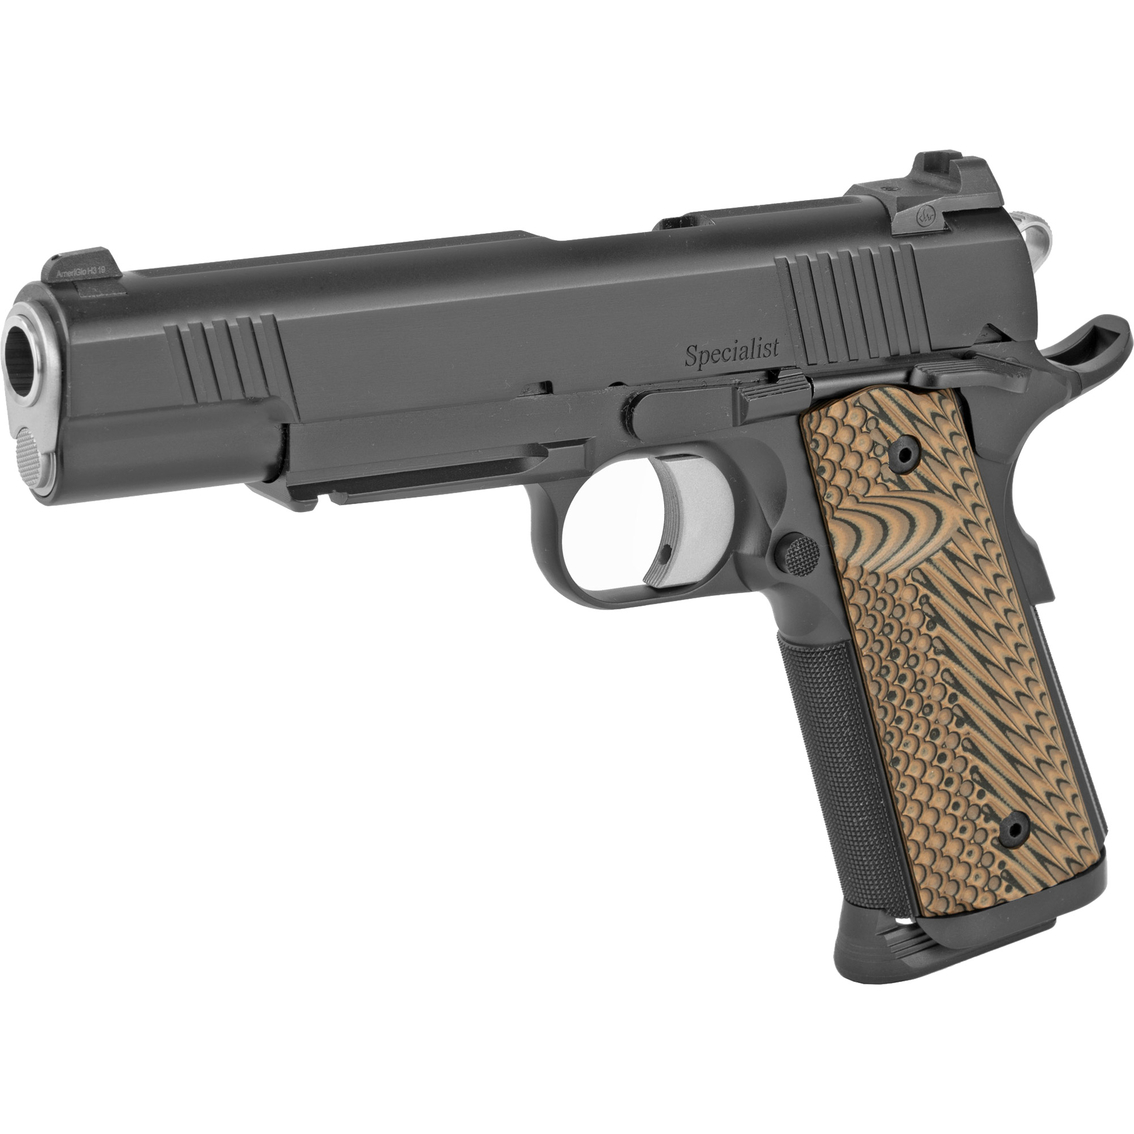 Dan Wesson 1911 Specialist 45 ACP 5 in. Barrel with Night Sights 8 Rnd Pistol STS - Image 3 of 3